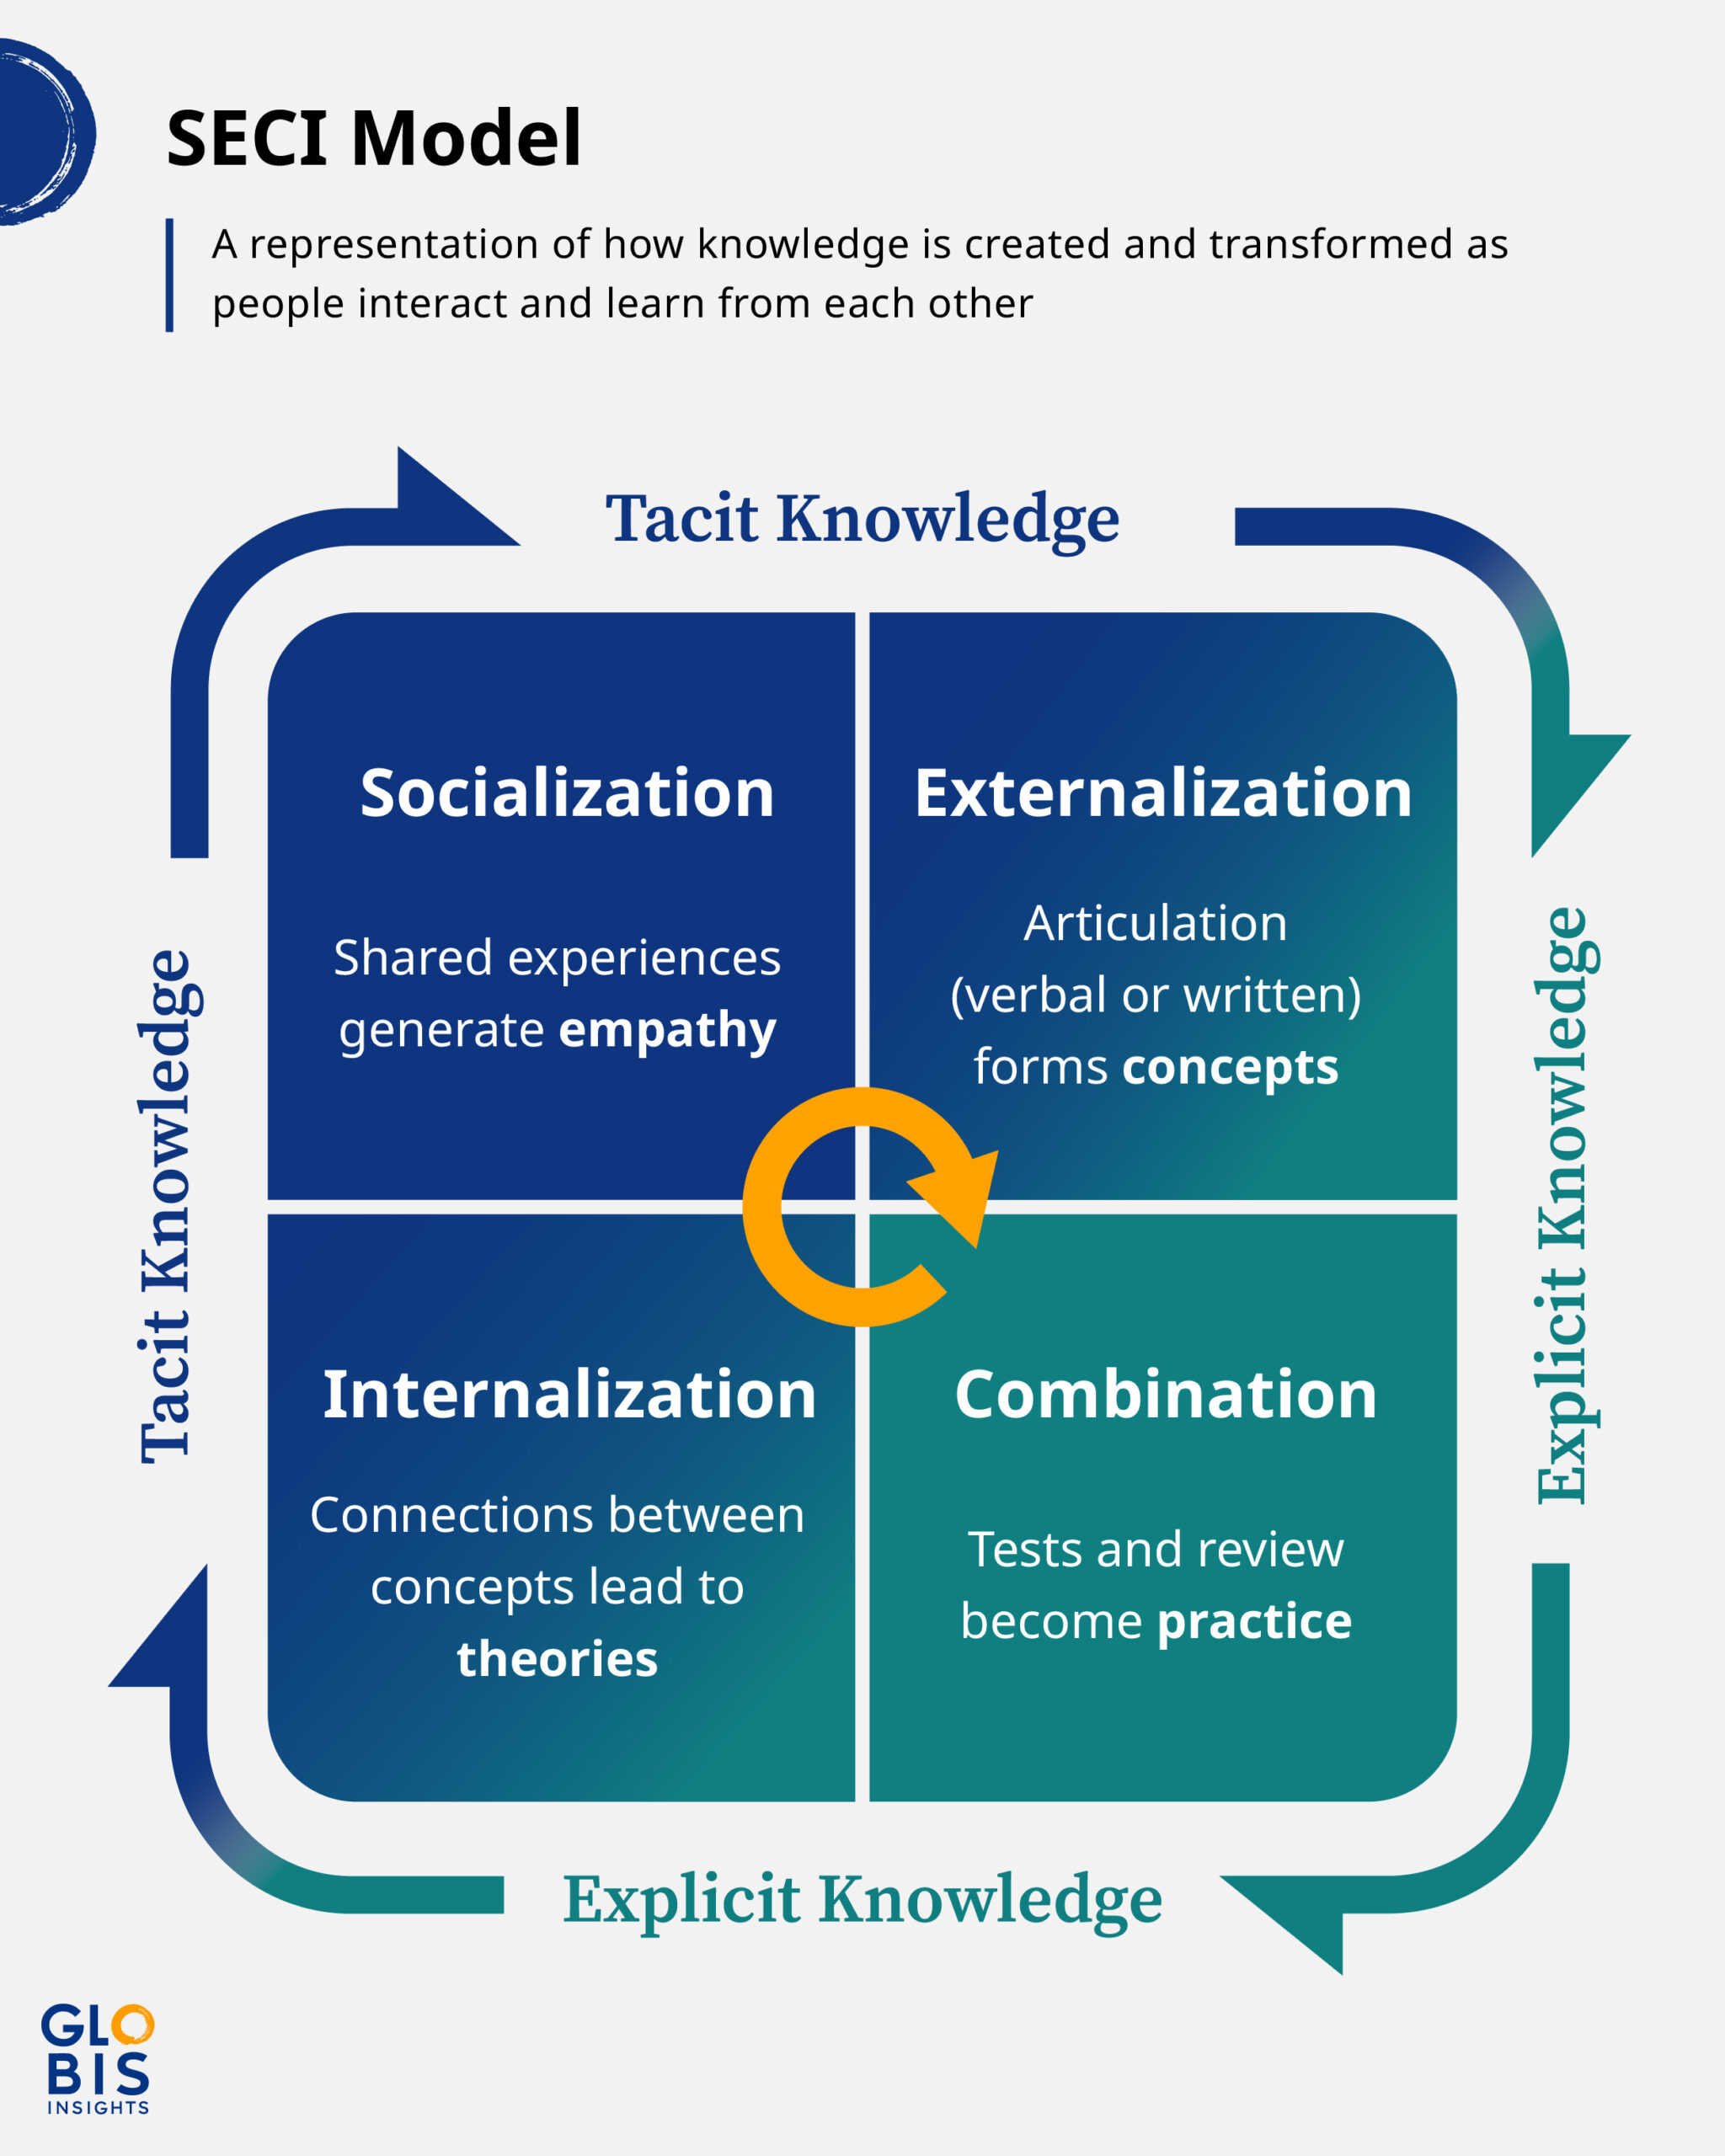 The SECI Model visualizes how knowledge is created and transformed as people interact, developing understanding and cultural empathy